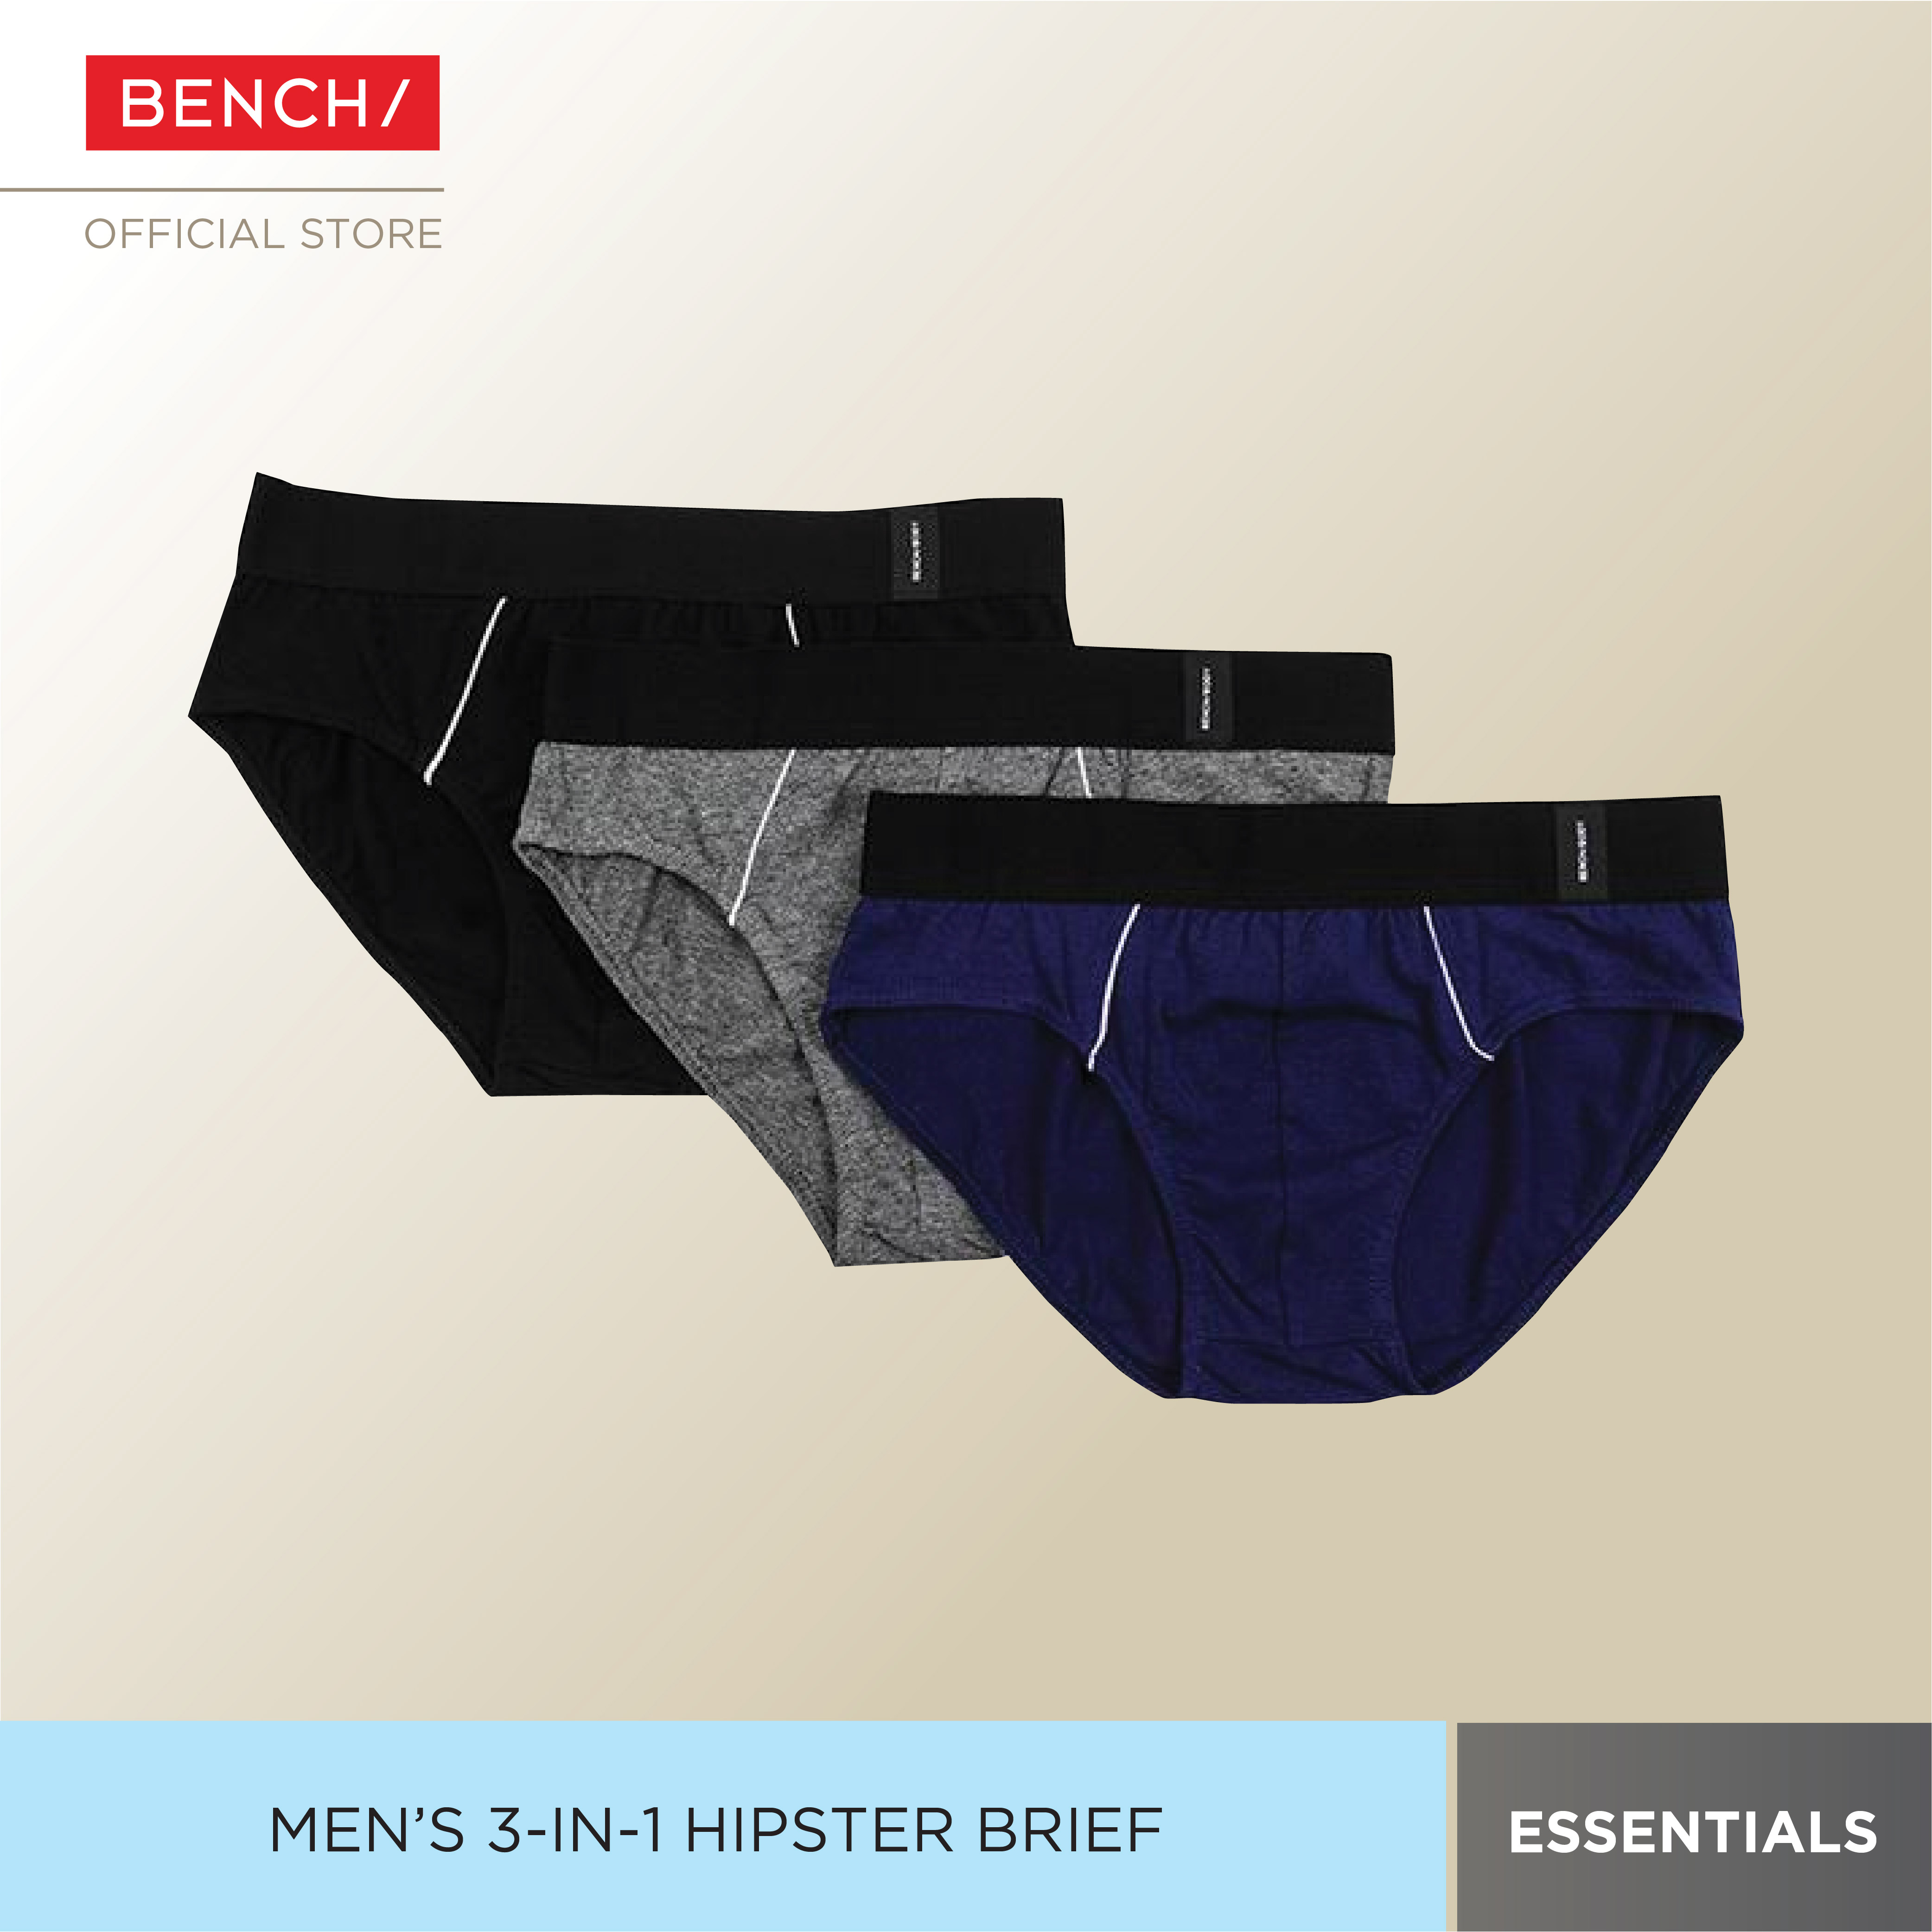 BENCH- TUB0313 Men's 3-in-1 Hipster Brief